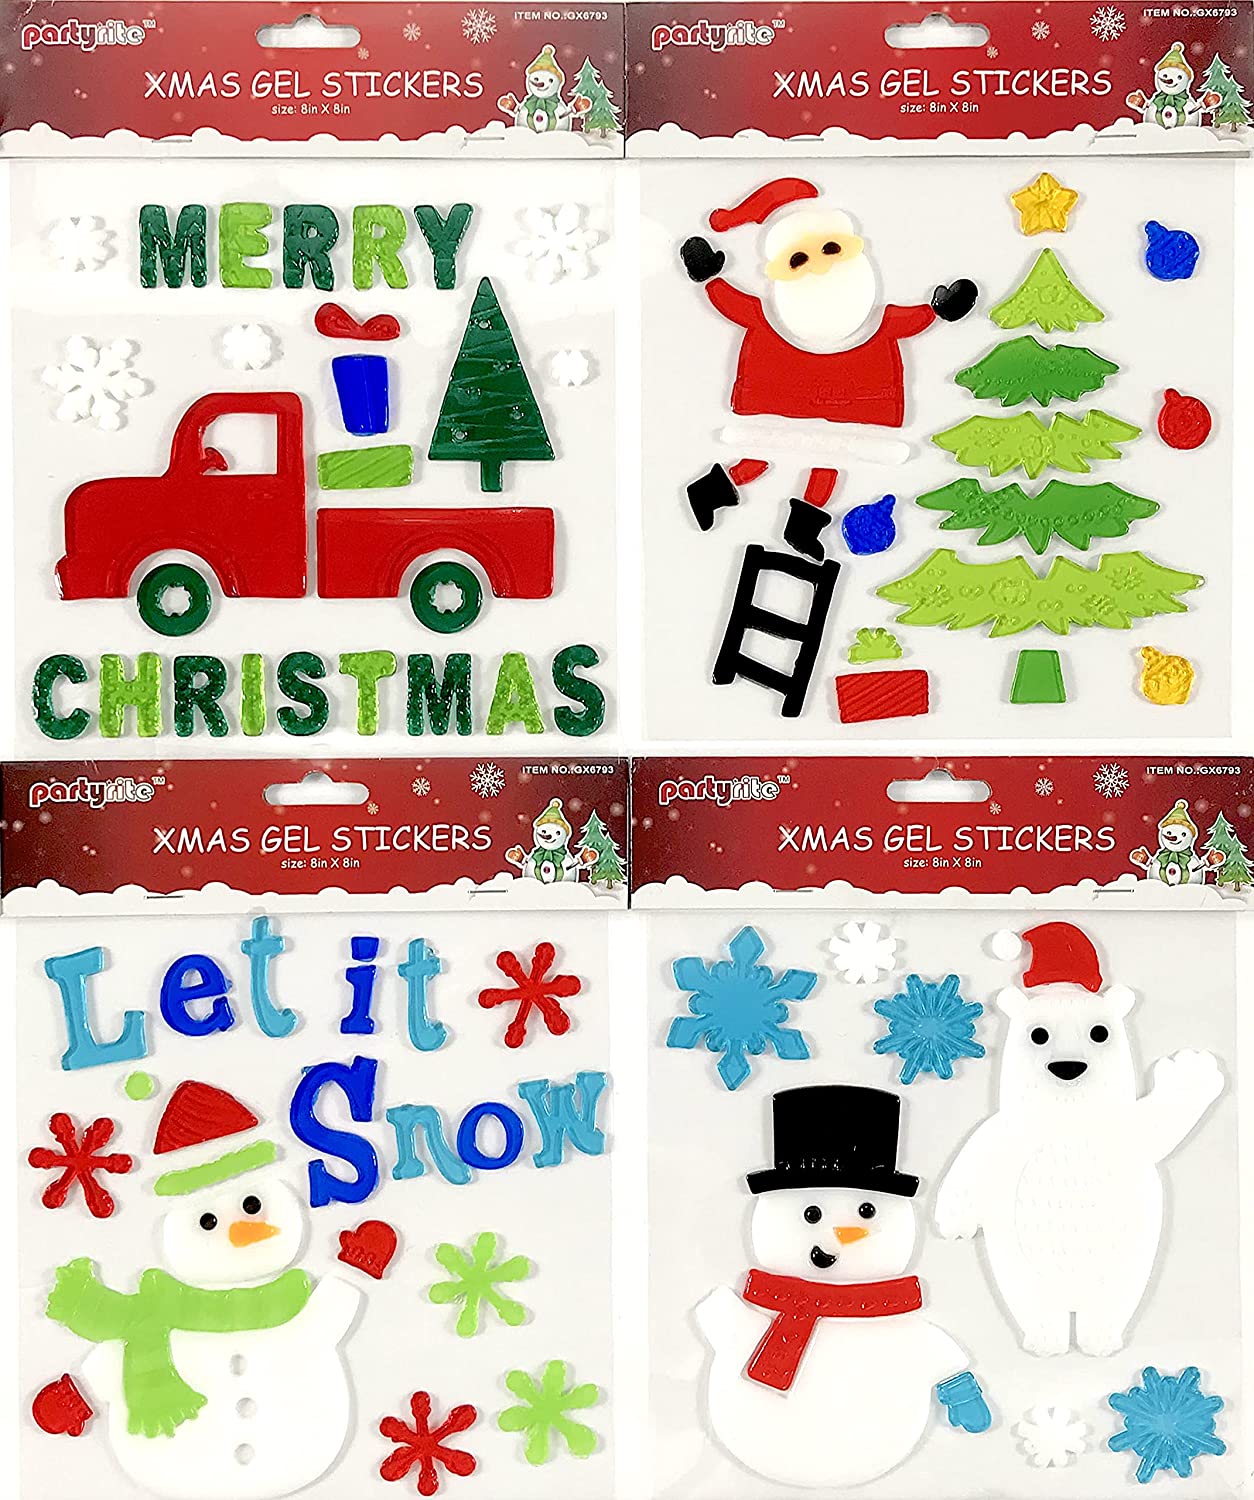 Christmas Window Clings For Glass Windows, Reusable Gel Window Clings Stickers For Kids, Christmas Window Decorations Include Santa Claus, Deer, Snowflakes